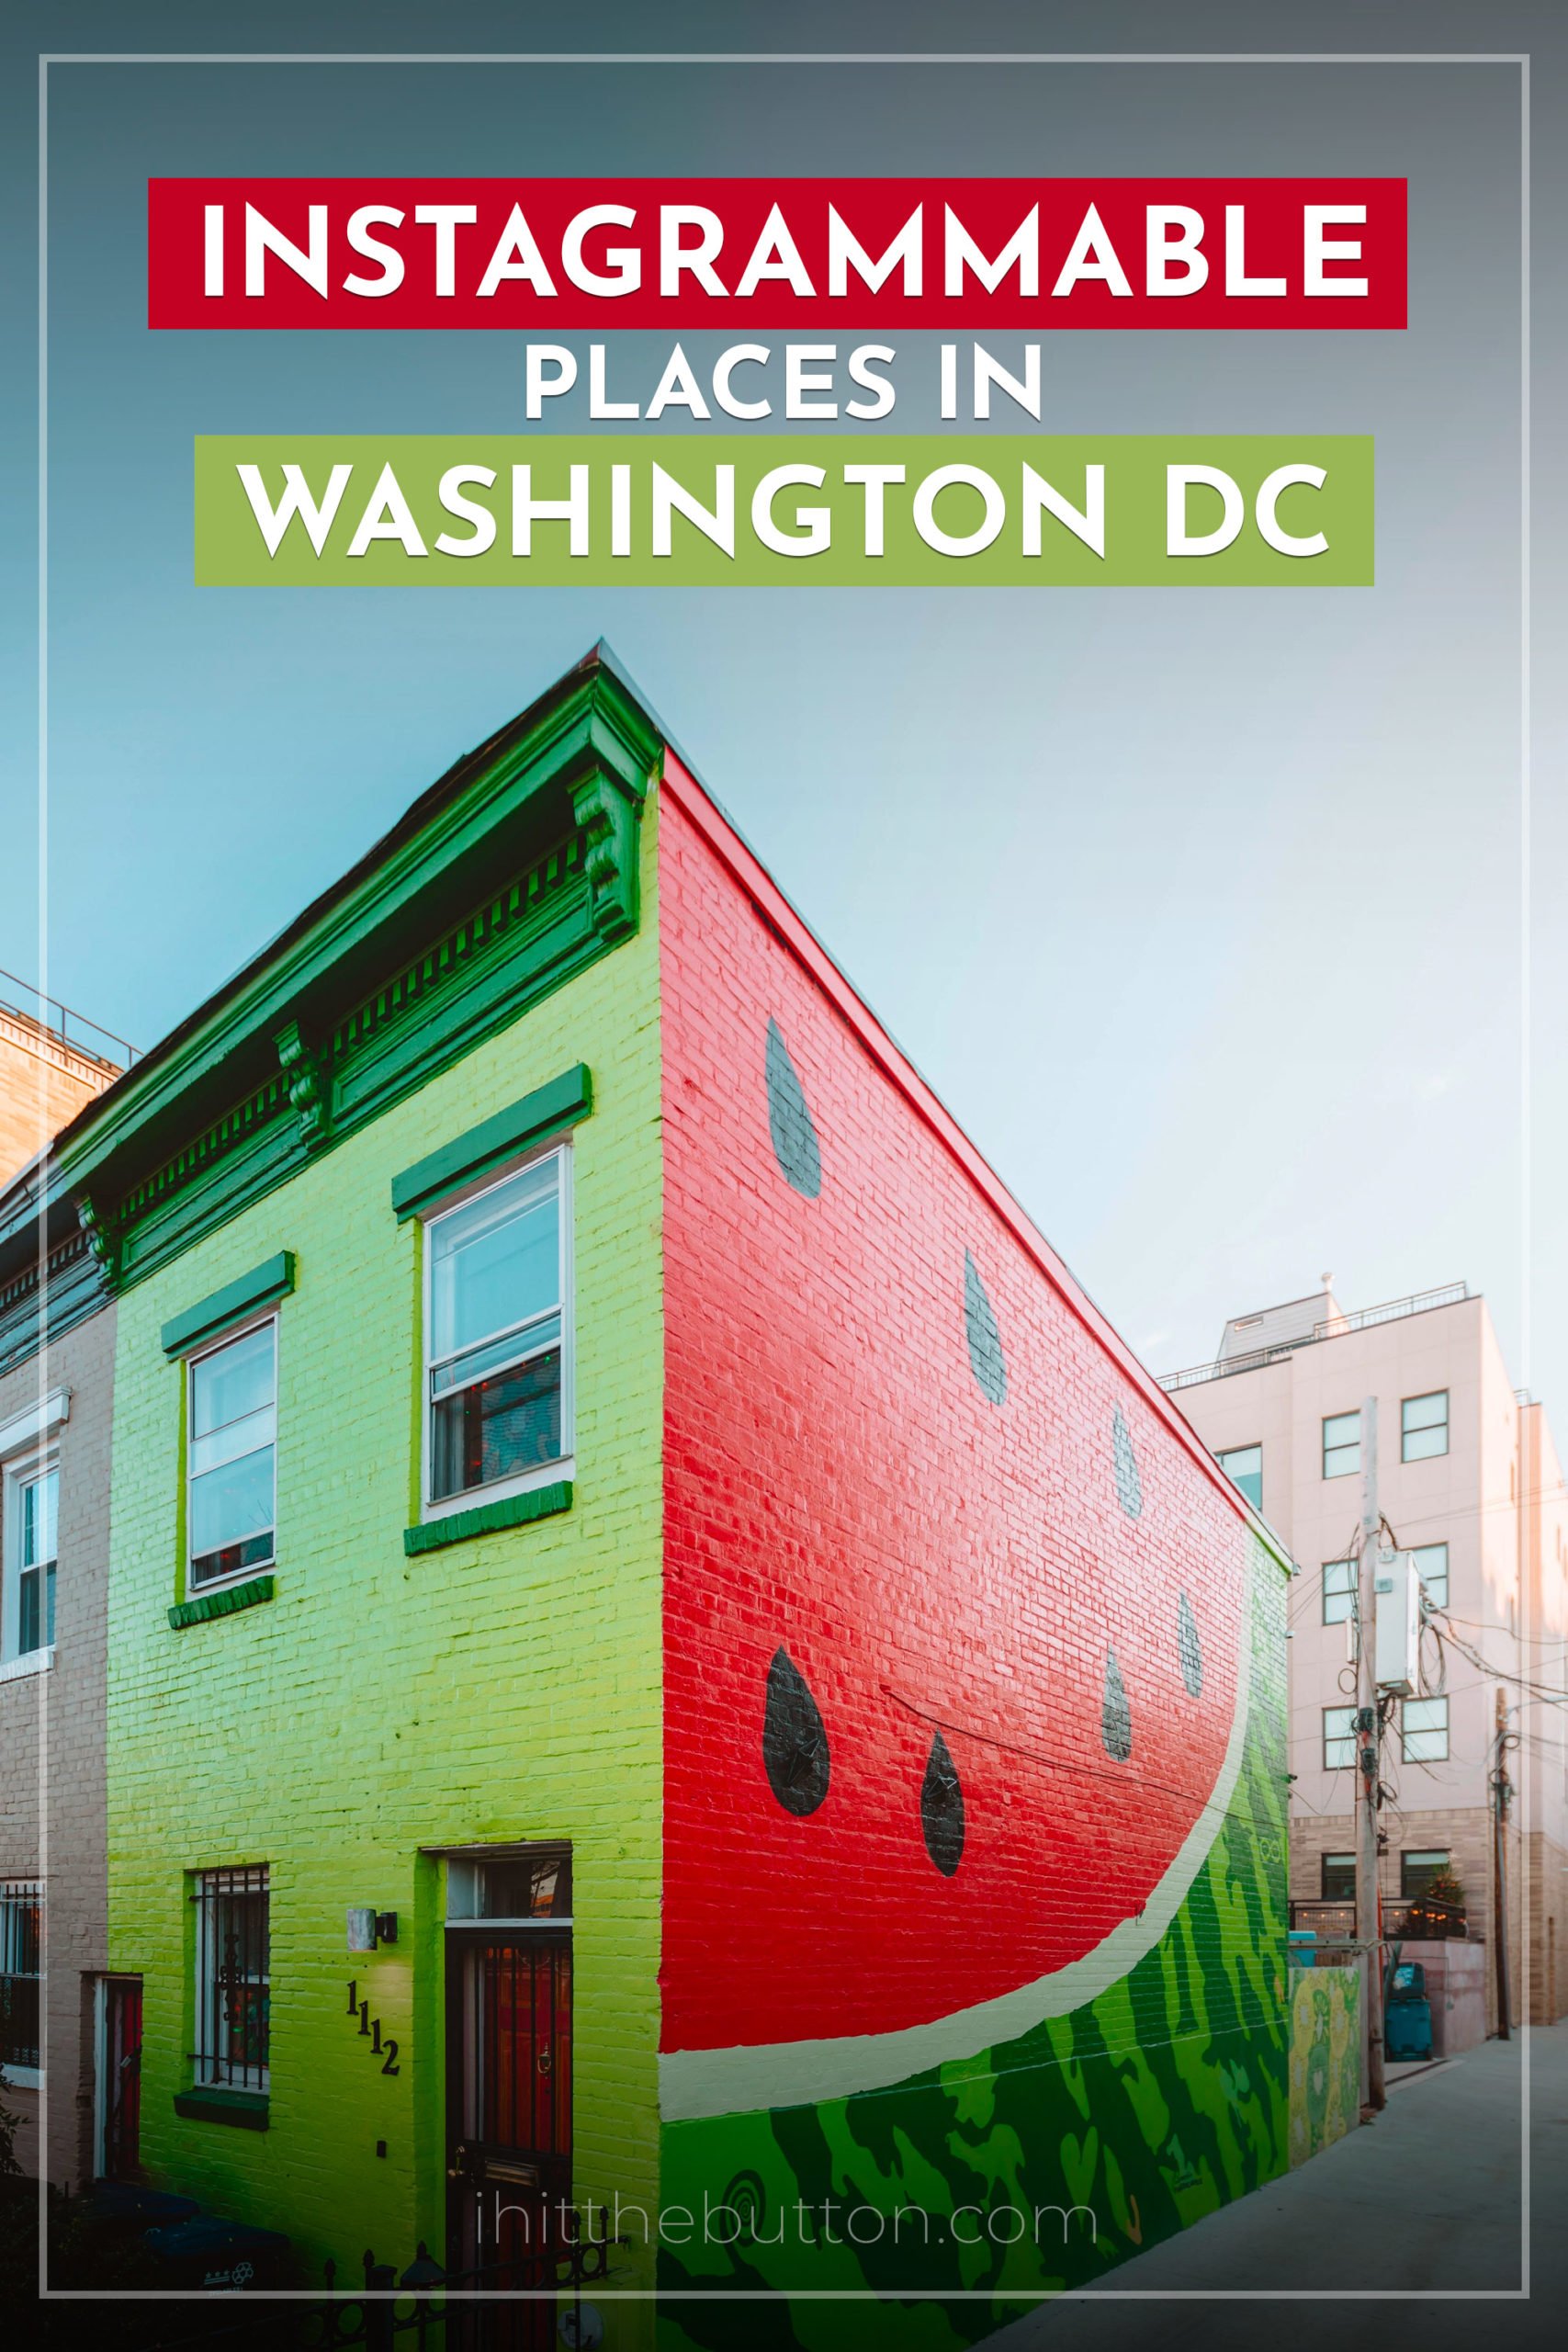 Pinterest Pin: Instagrammable Places in Washington DC